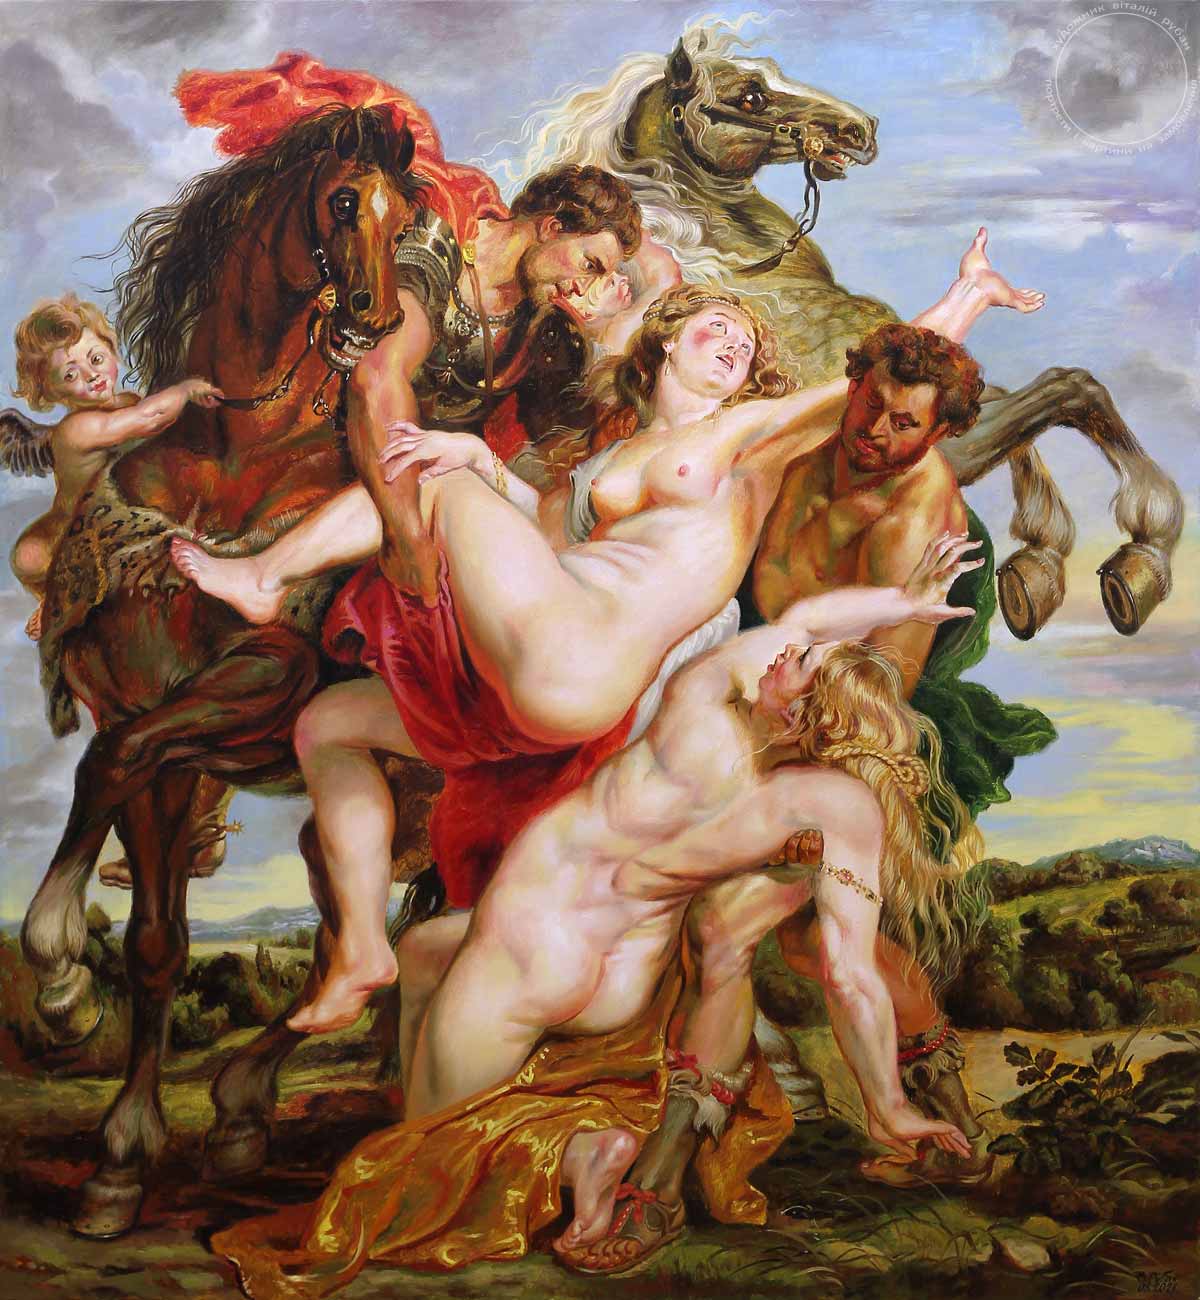 Copy of the painting The Rape of the Daughters of Leucippus - artist Vitalii Ruban.